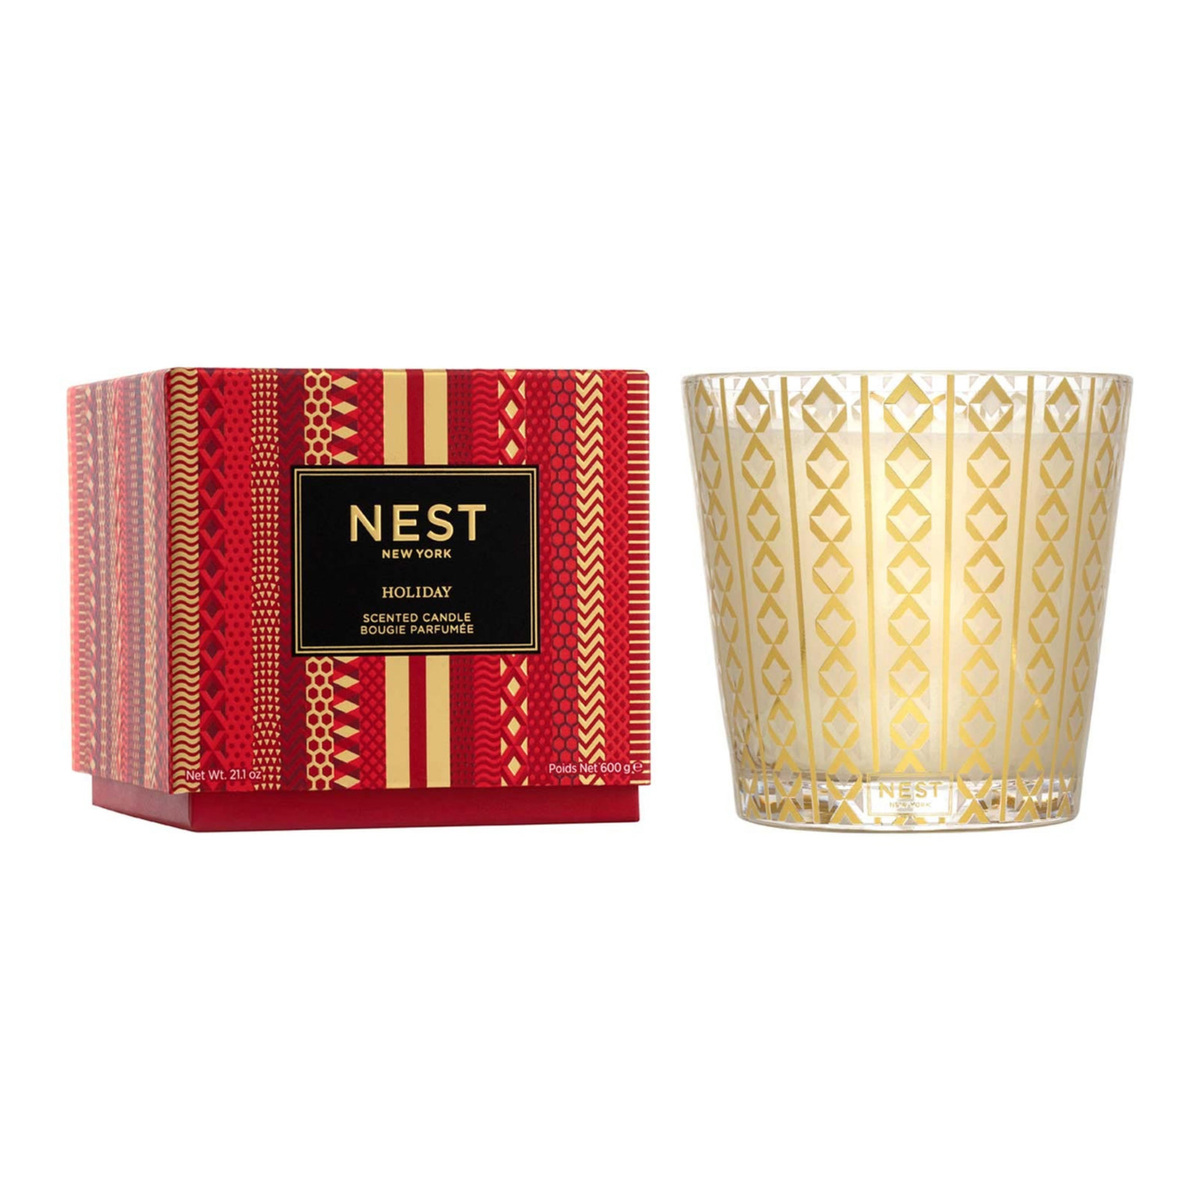 Product Image of Nest New York Holiday 3-Wick Candle with Box